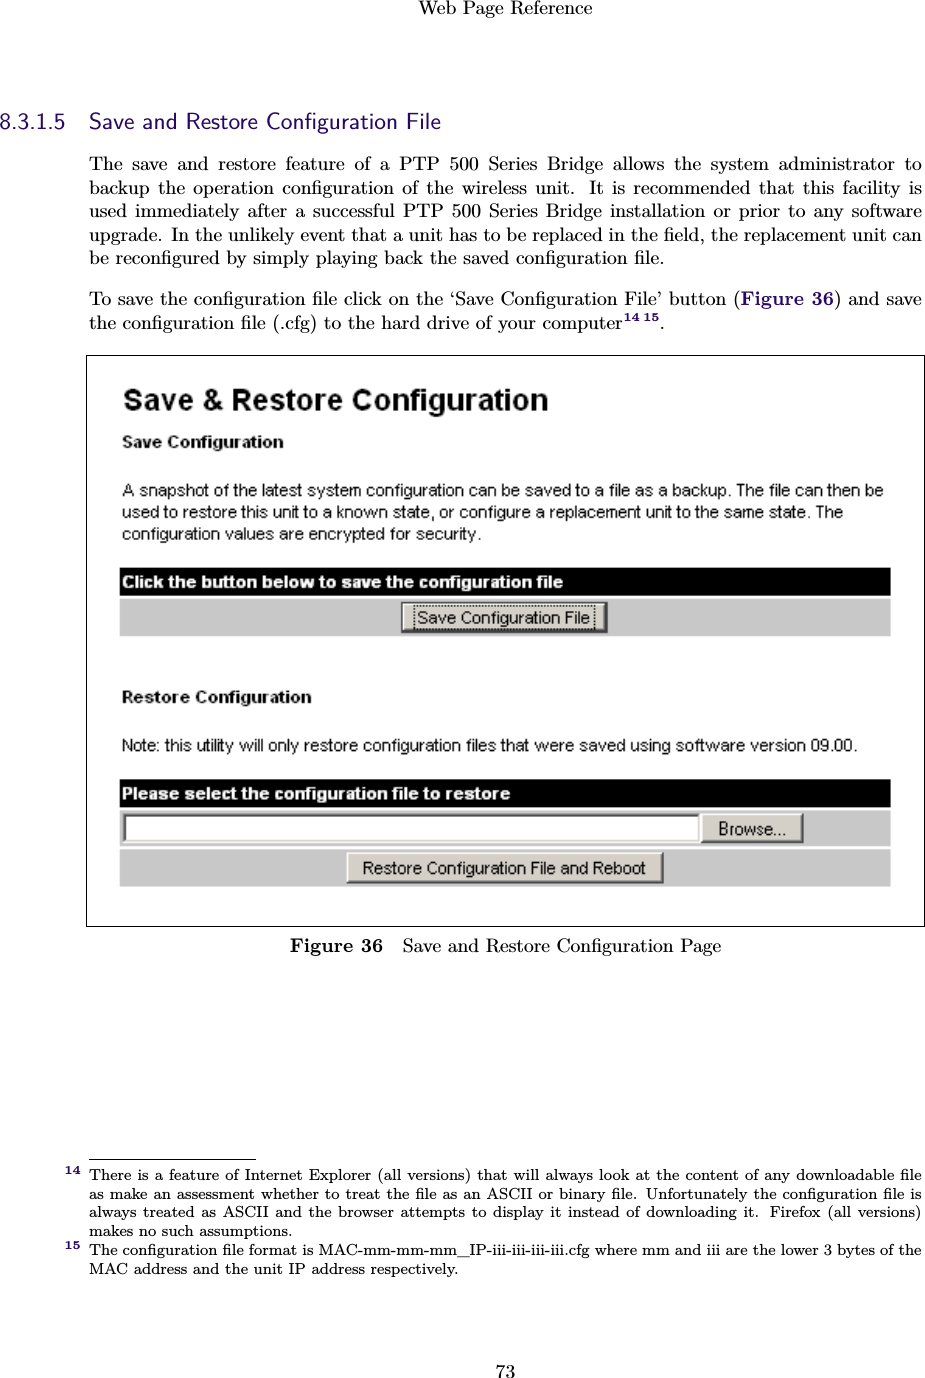 Web Page Reference738.3.1.5 Save and Restore Conﬁguration FileThe save and restore feature of a PTP 500 Series Bridge allows the system administrator tobackup the operation conﬁguration of the wireless unit. It is recommended that this facility isused immediately after a successful PTP 500 Series Bridge installation or prior to any softwareupgrade. In the unlikely event that a unit has to be replaced in the ﬁeld, the replacement unit canbe reconﬁgured by simply playing back the saved conﬁguration ﬁle.To save the conﬁguration ﬁle click on the ‘Save Conﬁguration File’ button (Figure 36) and savethe conﬁguration ﬁle (.cfg) to the hard drive of your computer14 15.Figure 36 Save and Restore Conﬁguration PageThere is a feature of Internet Explorer (all versions) that will always look at the content of any downloadable ﬁle14as make an assessment whether to treat the ﬁle as an ASCII or binary ﬁle. Unfortunately the conﬁguration ﬁle isalways treated as ASCII and the browser attempts to display it instead of downloading it. Firefox (all versions)makes no such assumptions.The conﬁguration ﬁle format is MAC-mm-mm-mm_IP-iii-iii-iii-iii.cfg where mm and iii are the lower 3 bytes of the15MAC address and the unit IP address respectively.